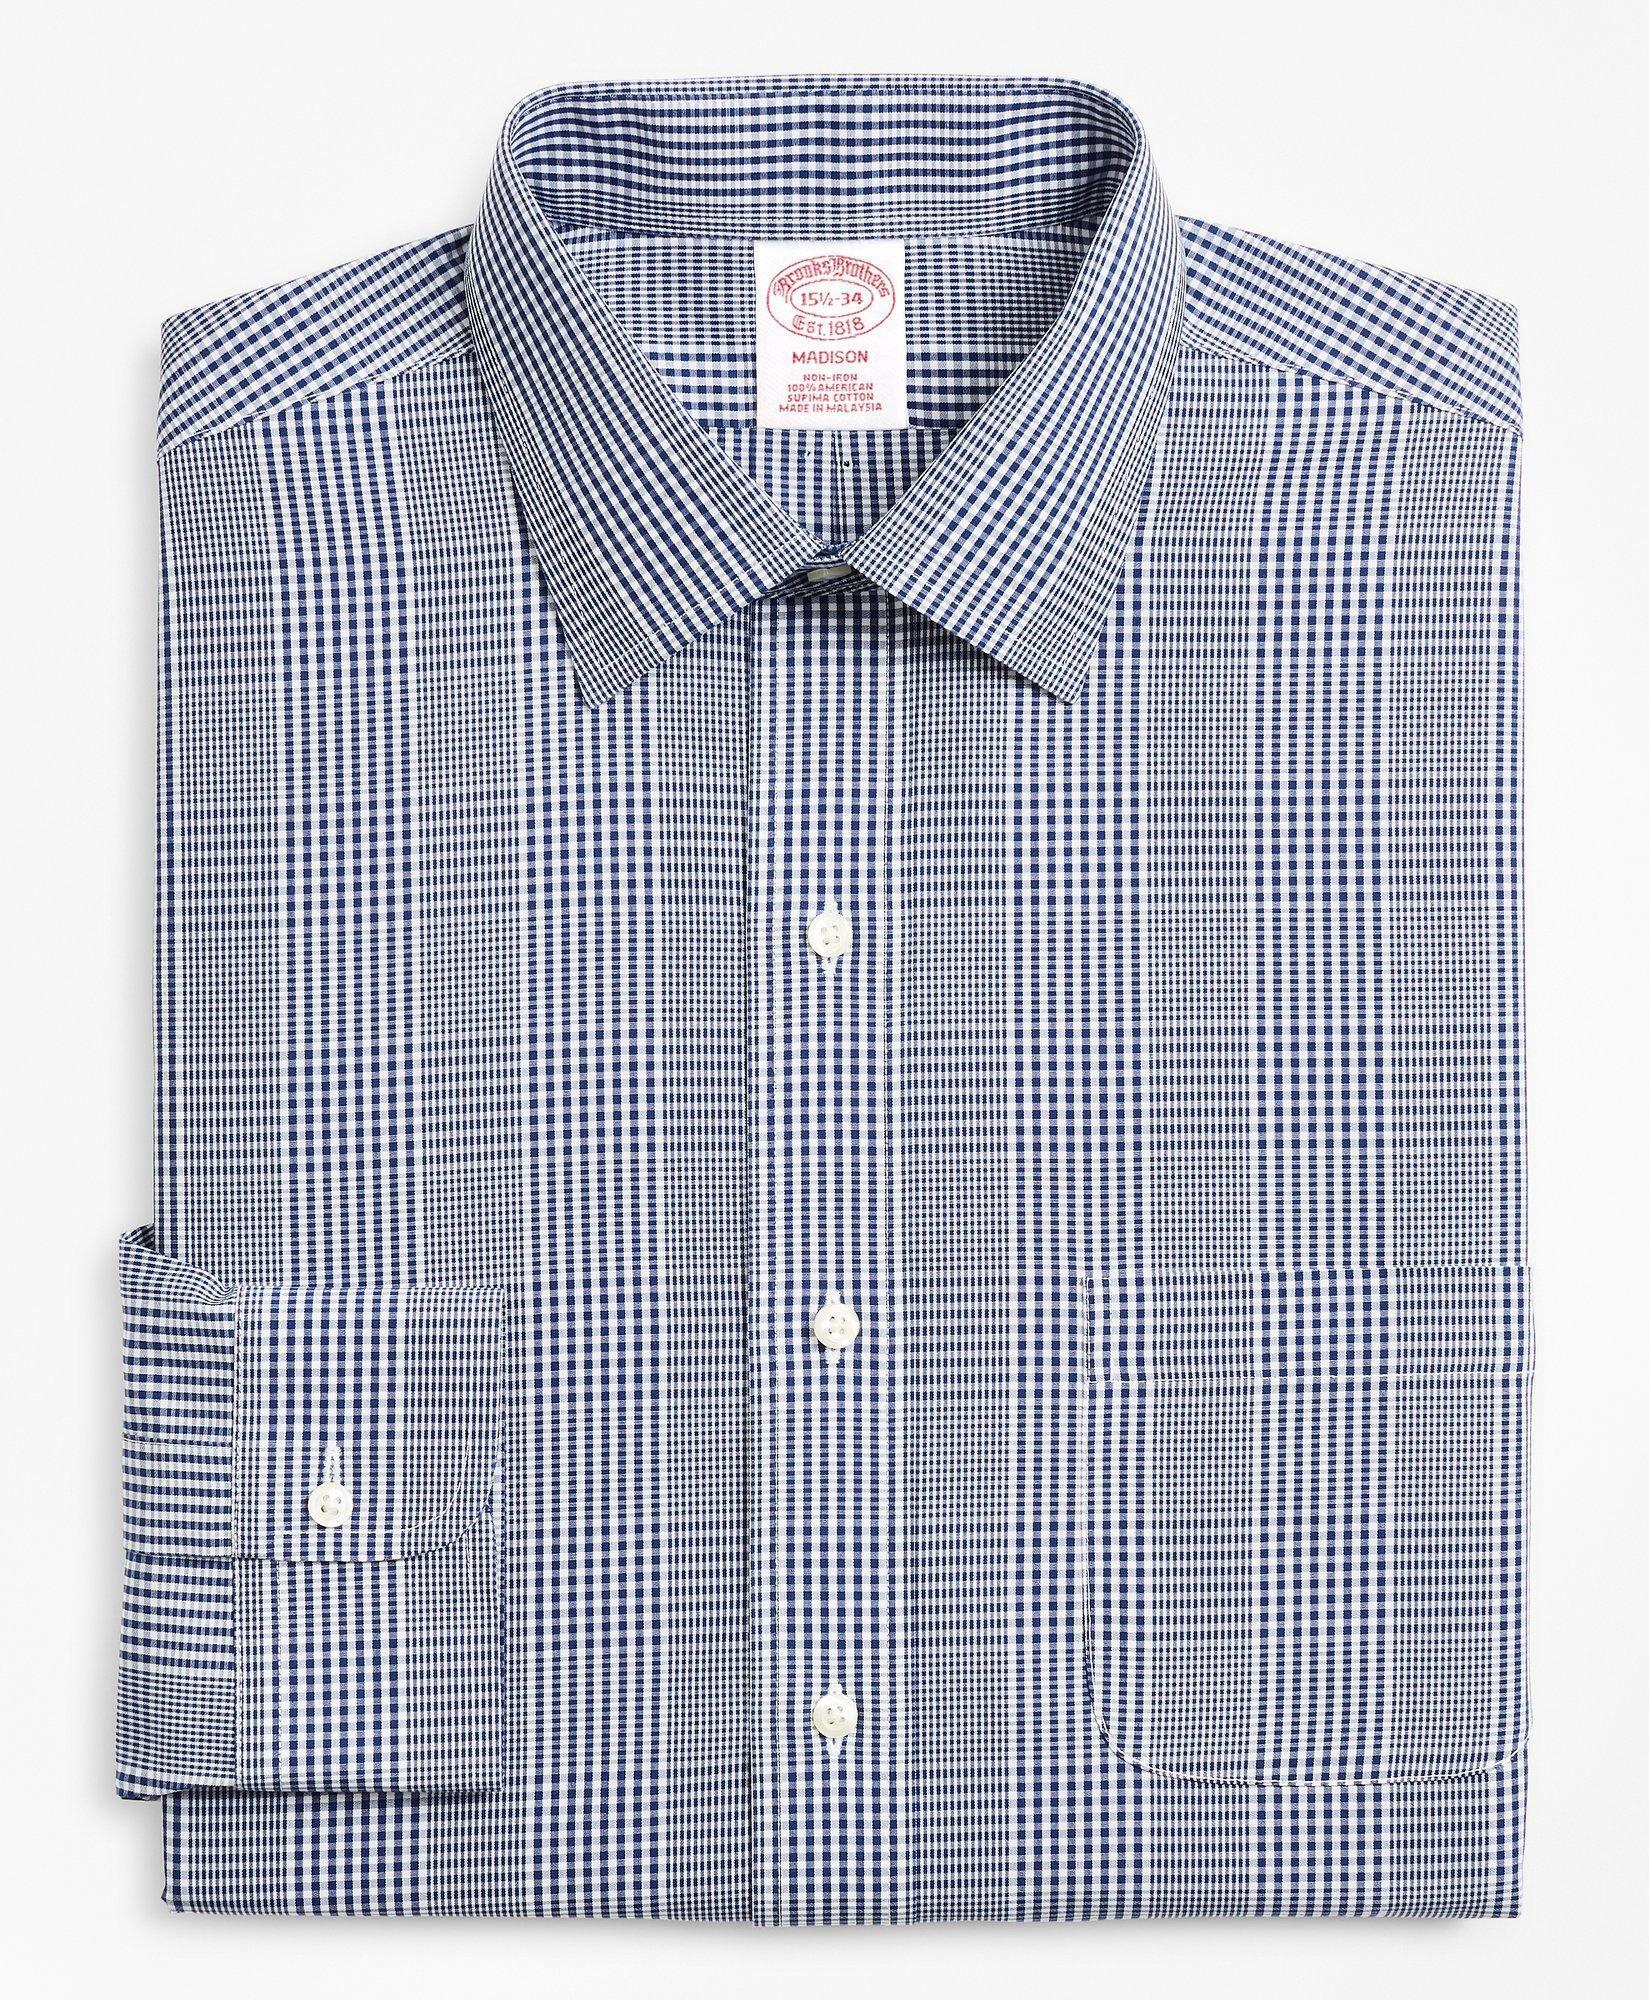 Brooks Brothers Men's Madison Relaxed-Fit Dress Shirt, Non-Iron Glen Plaid | Navy